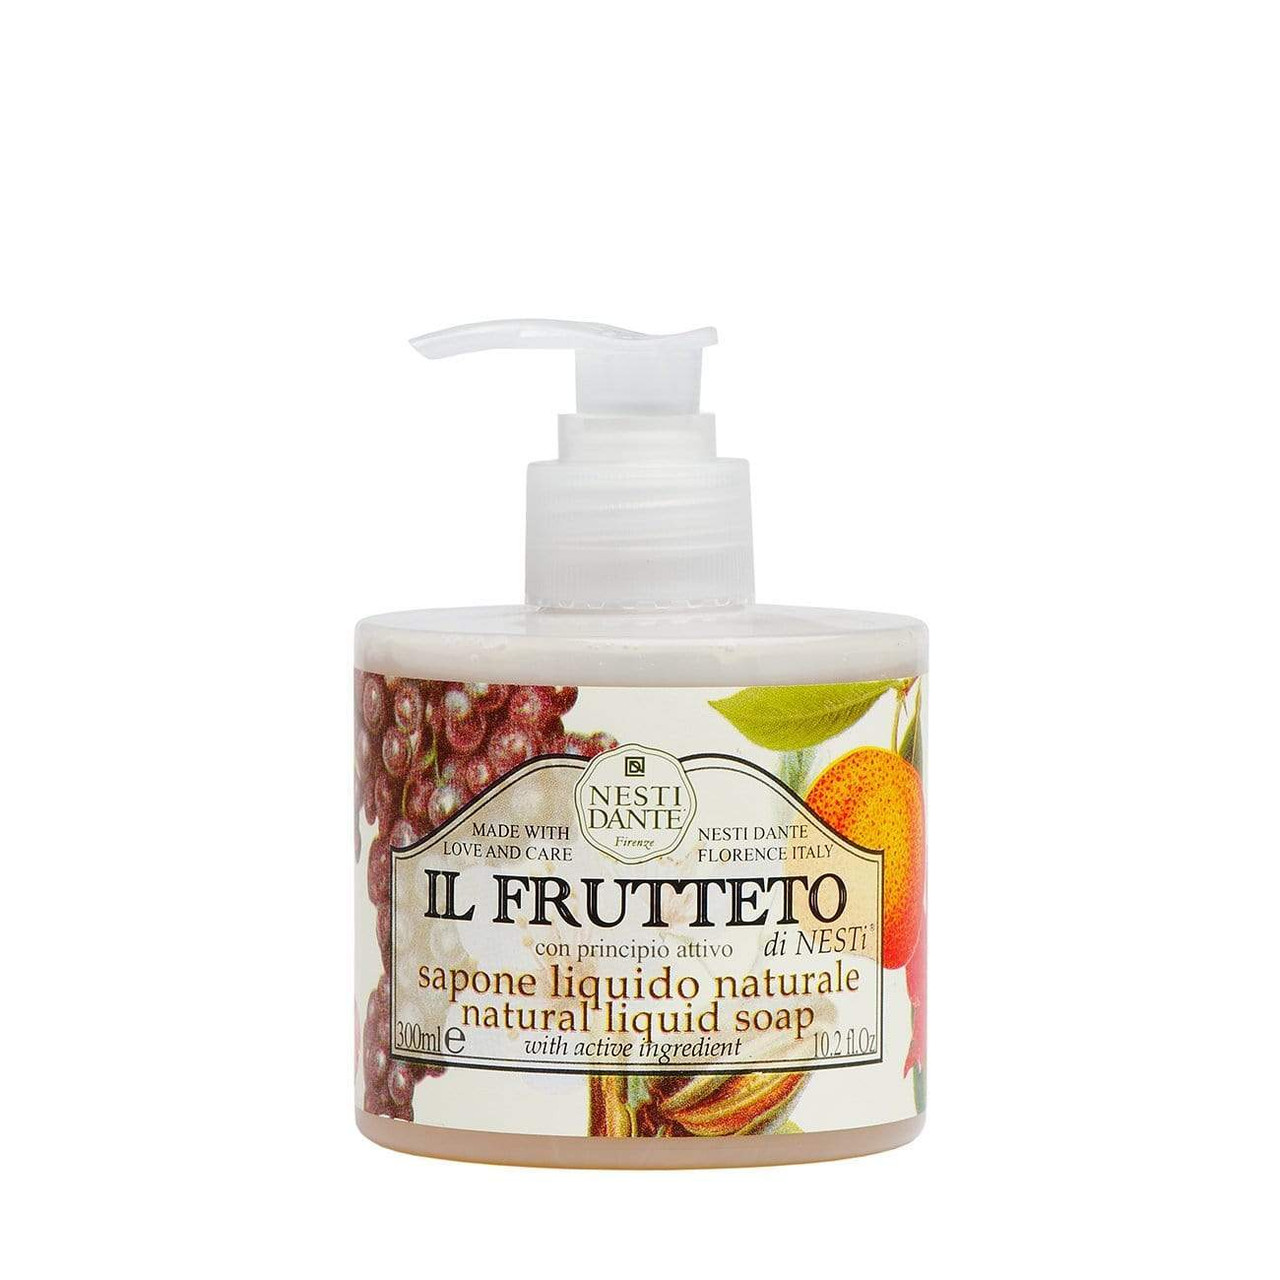 Il Frutteto Liquid Hand Soap - 300ml - Seeds from Italy